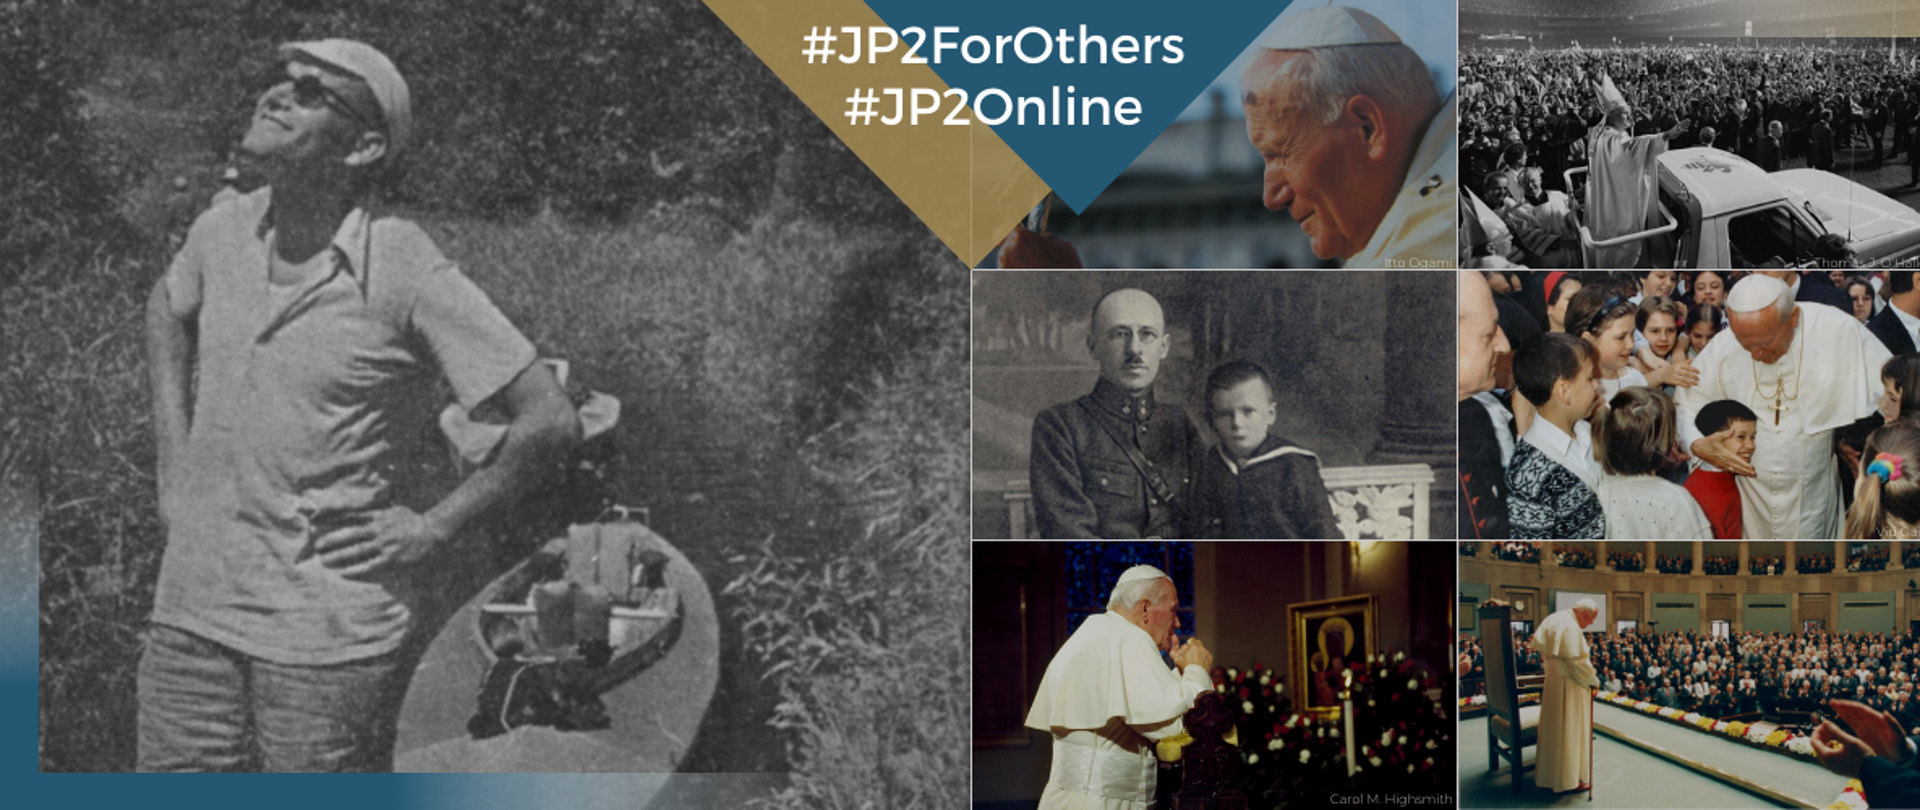 jp2forothers